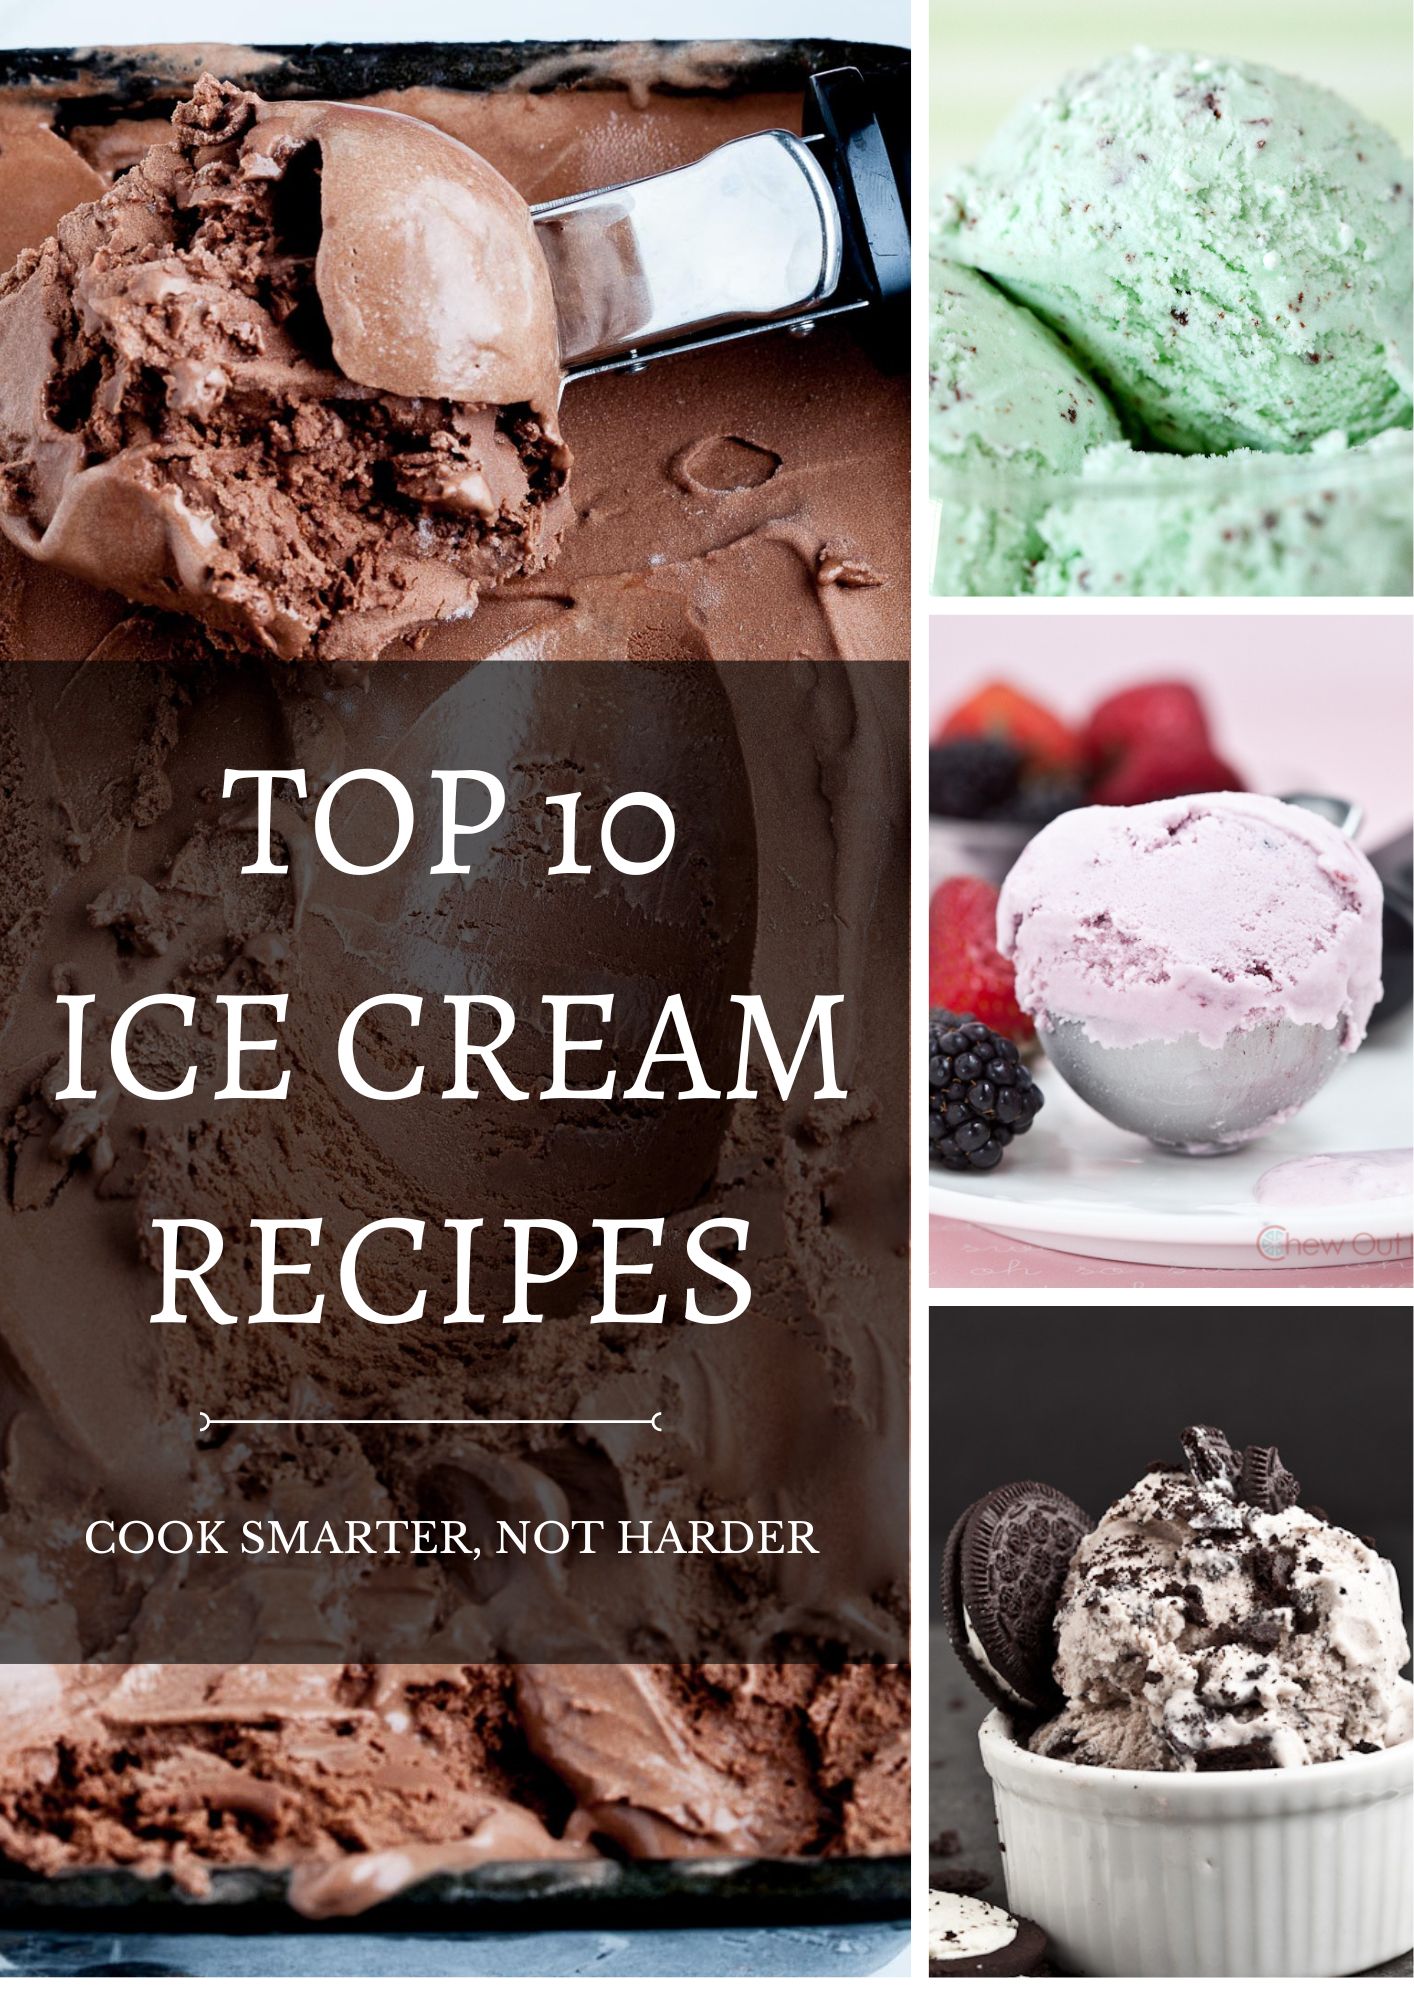 https://www.chewoutloud.com/wp-content/uploads/2019/06/Ice-Cream-Recipes-Collection-Roundup.jpg